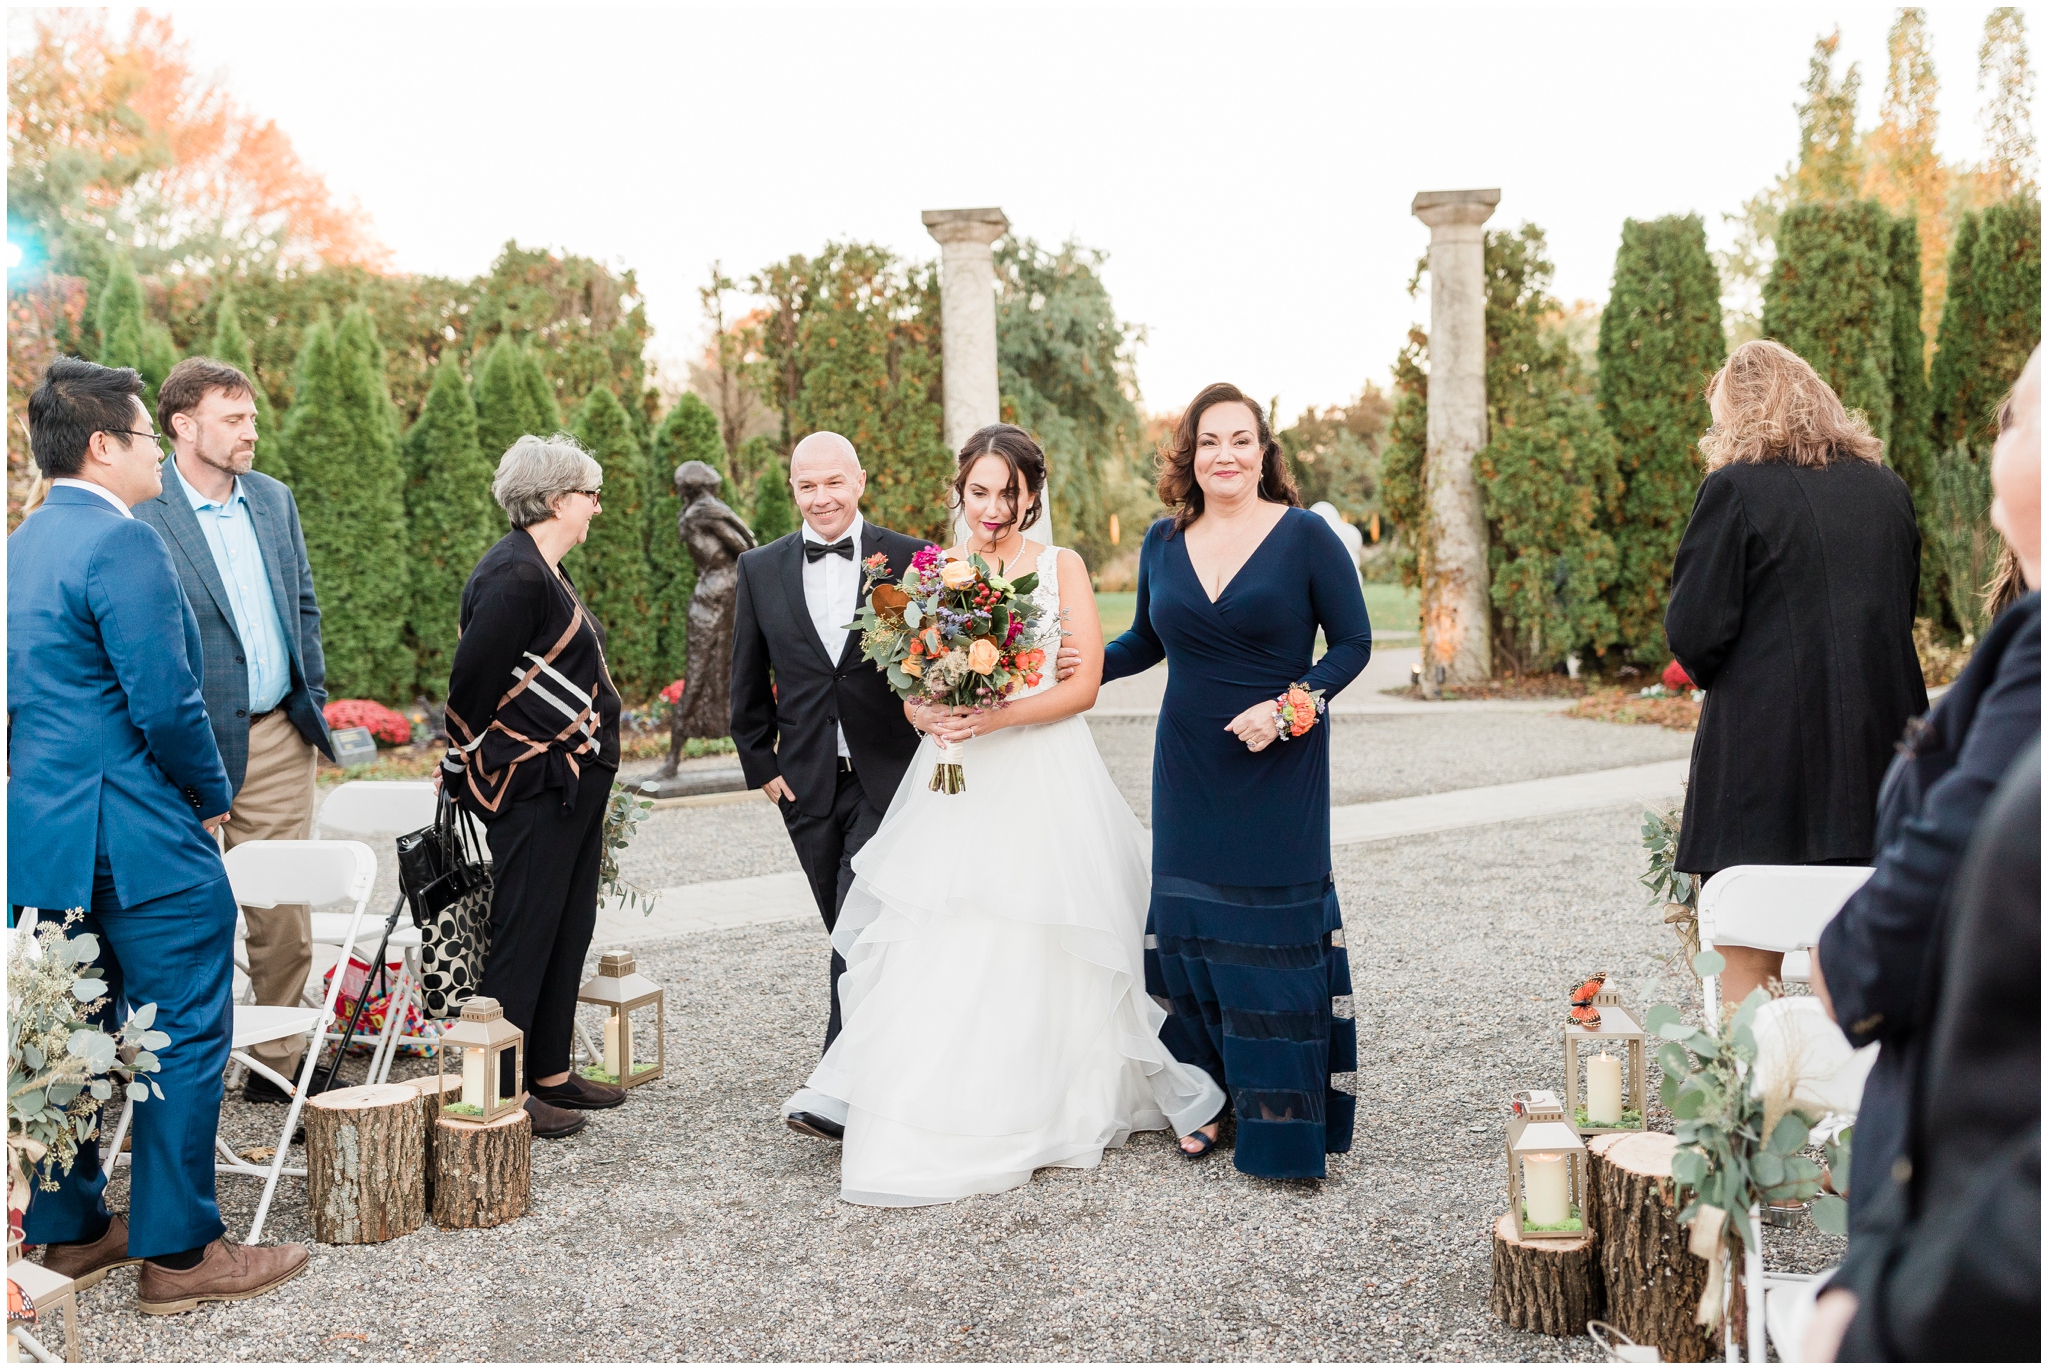 Outdoor Ceremony at Grounds for Sculpture Pics